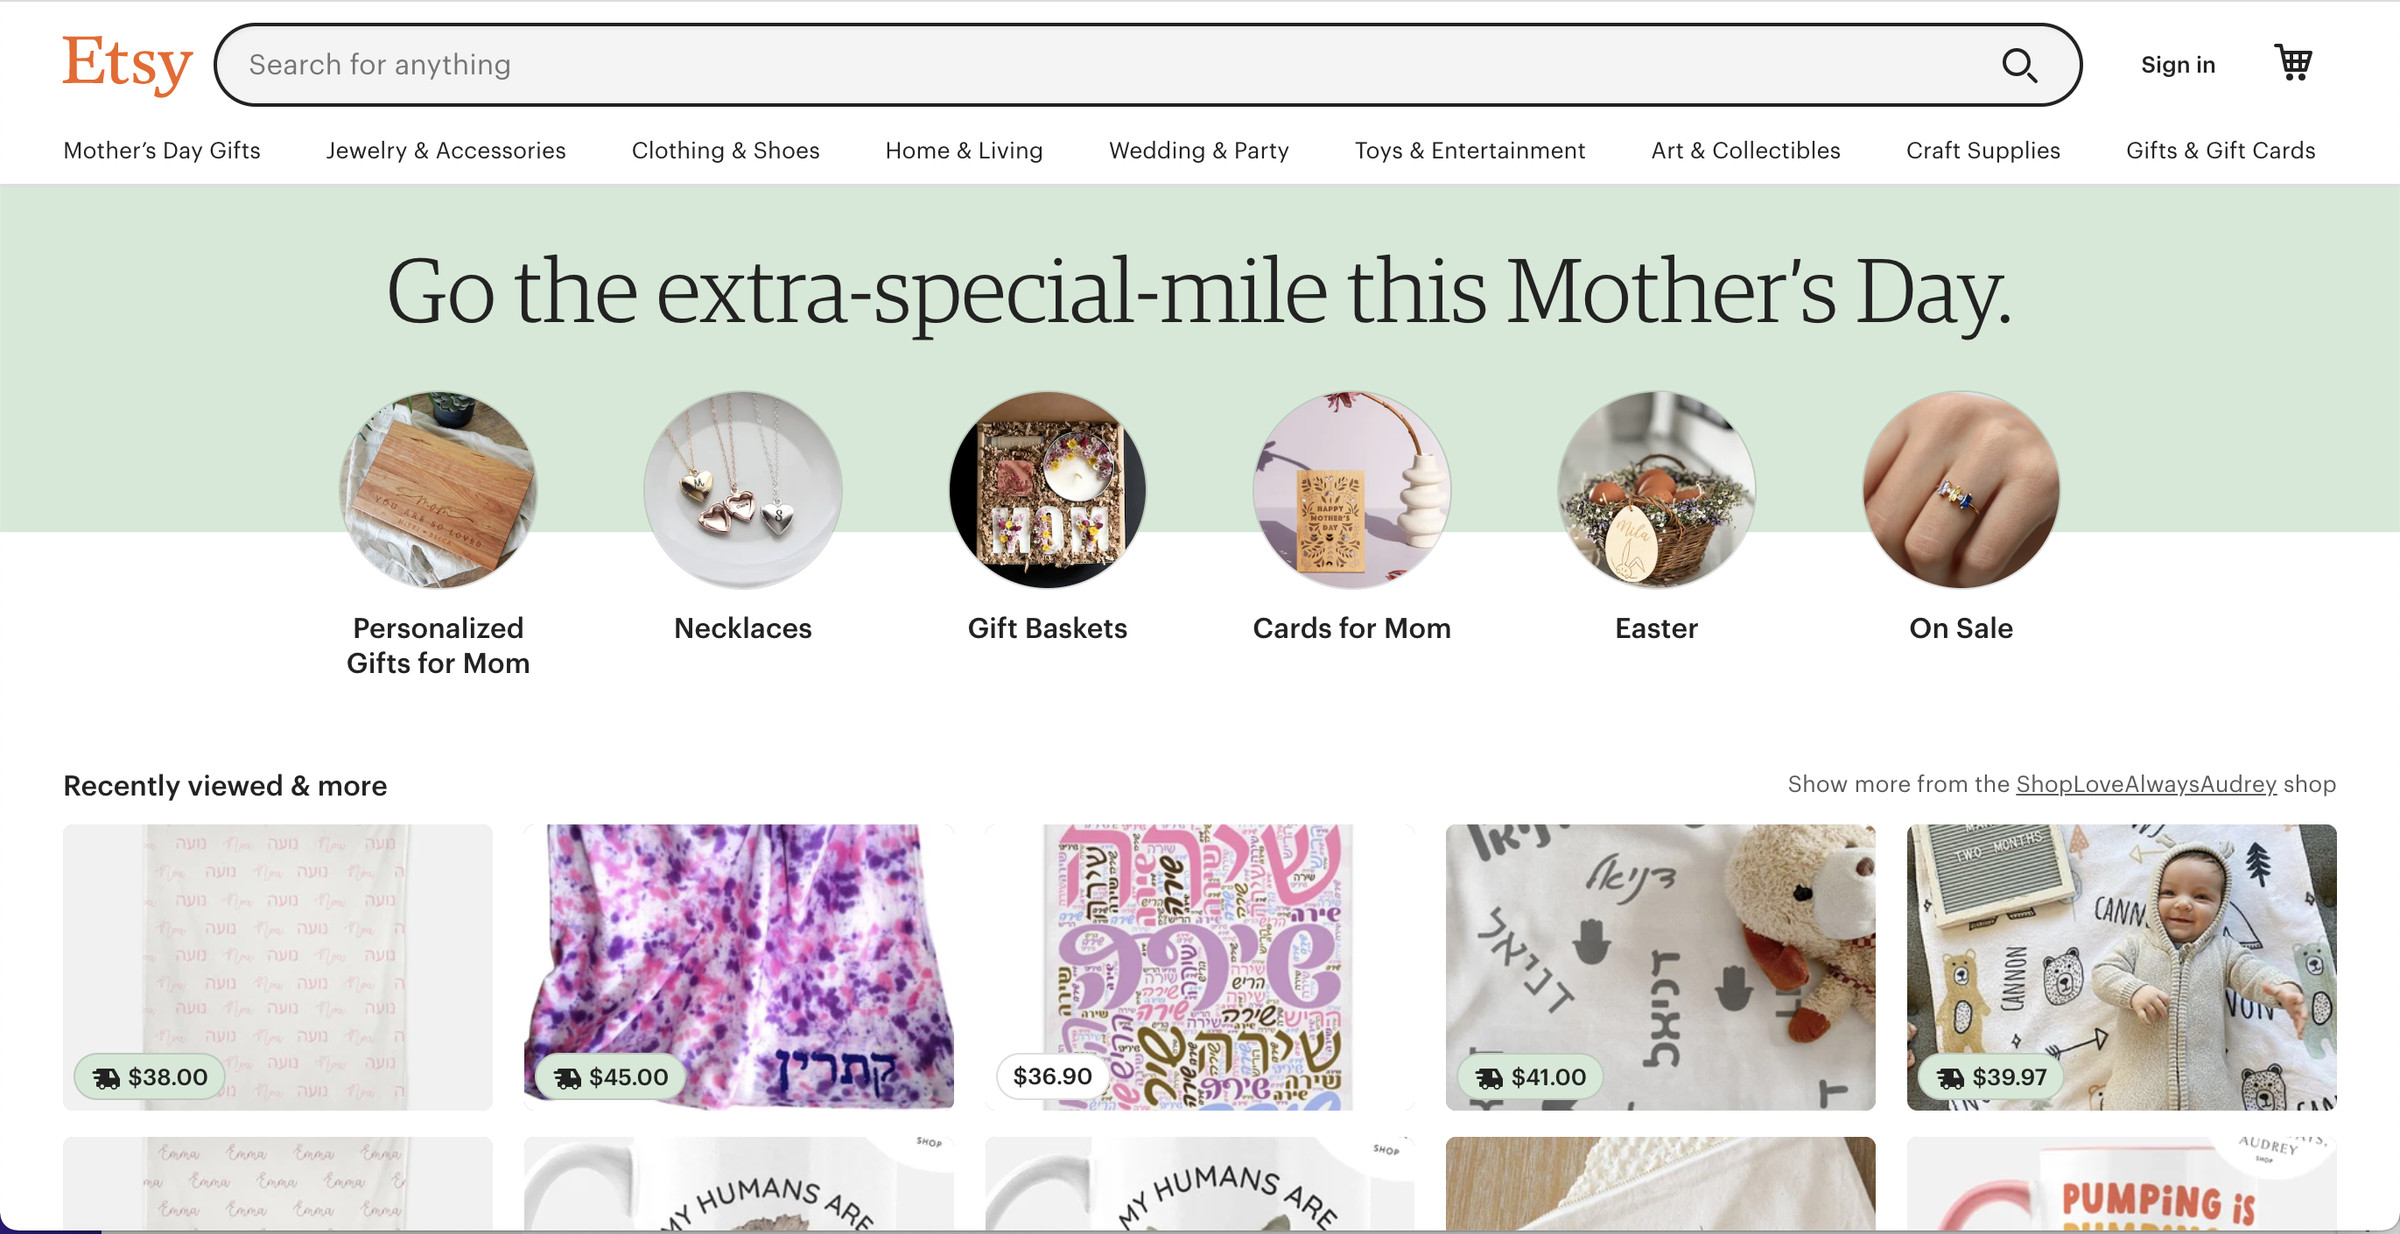 The Etsy front page reading “Go the extra-special-mile this Mother’s Day” together with round photos of various gift categories, and square photos underneath.